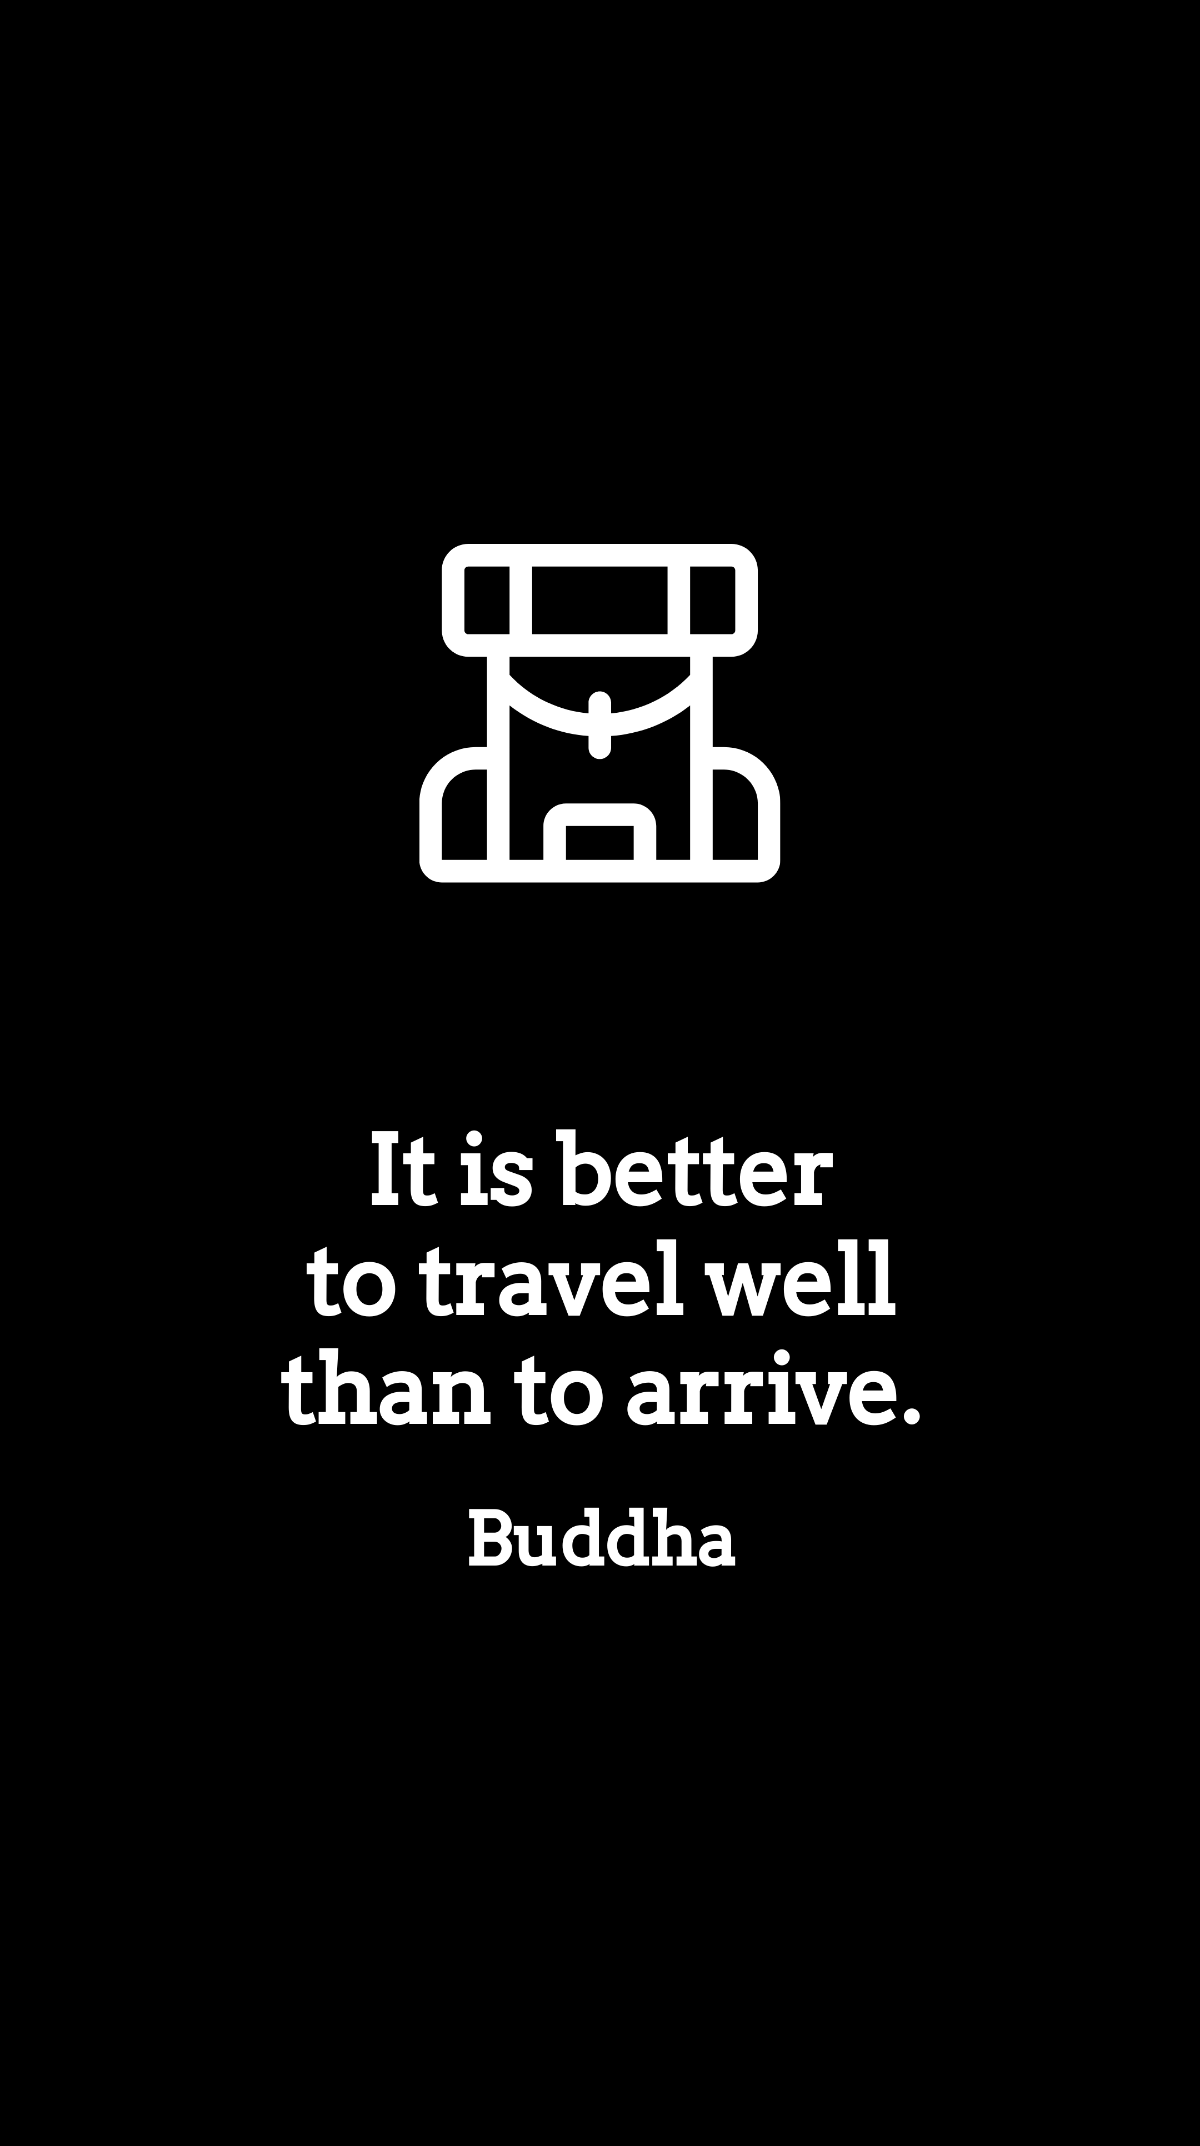 Buddha - It is better to travel well than to arrive.